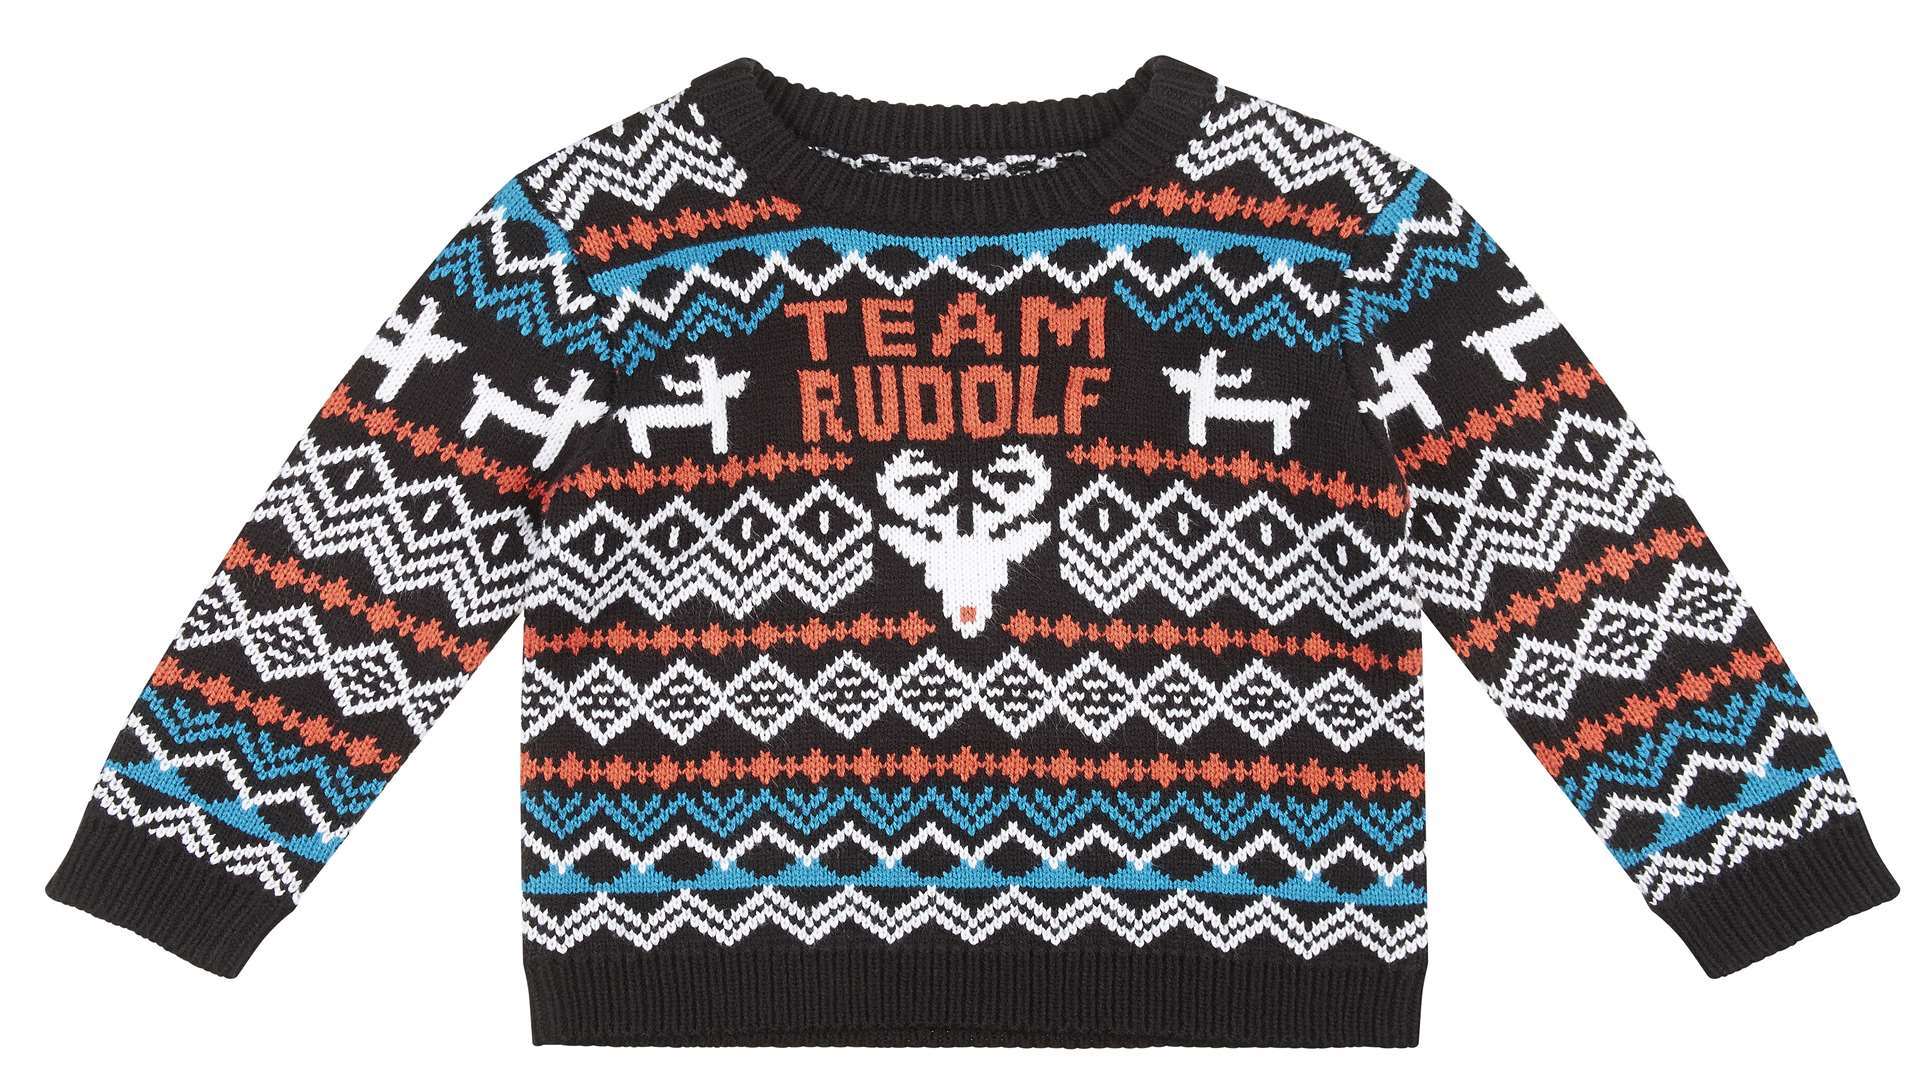 We simply love this Team Rudolf sweater for kids from River Island. It costs from £12.